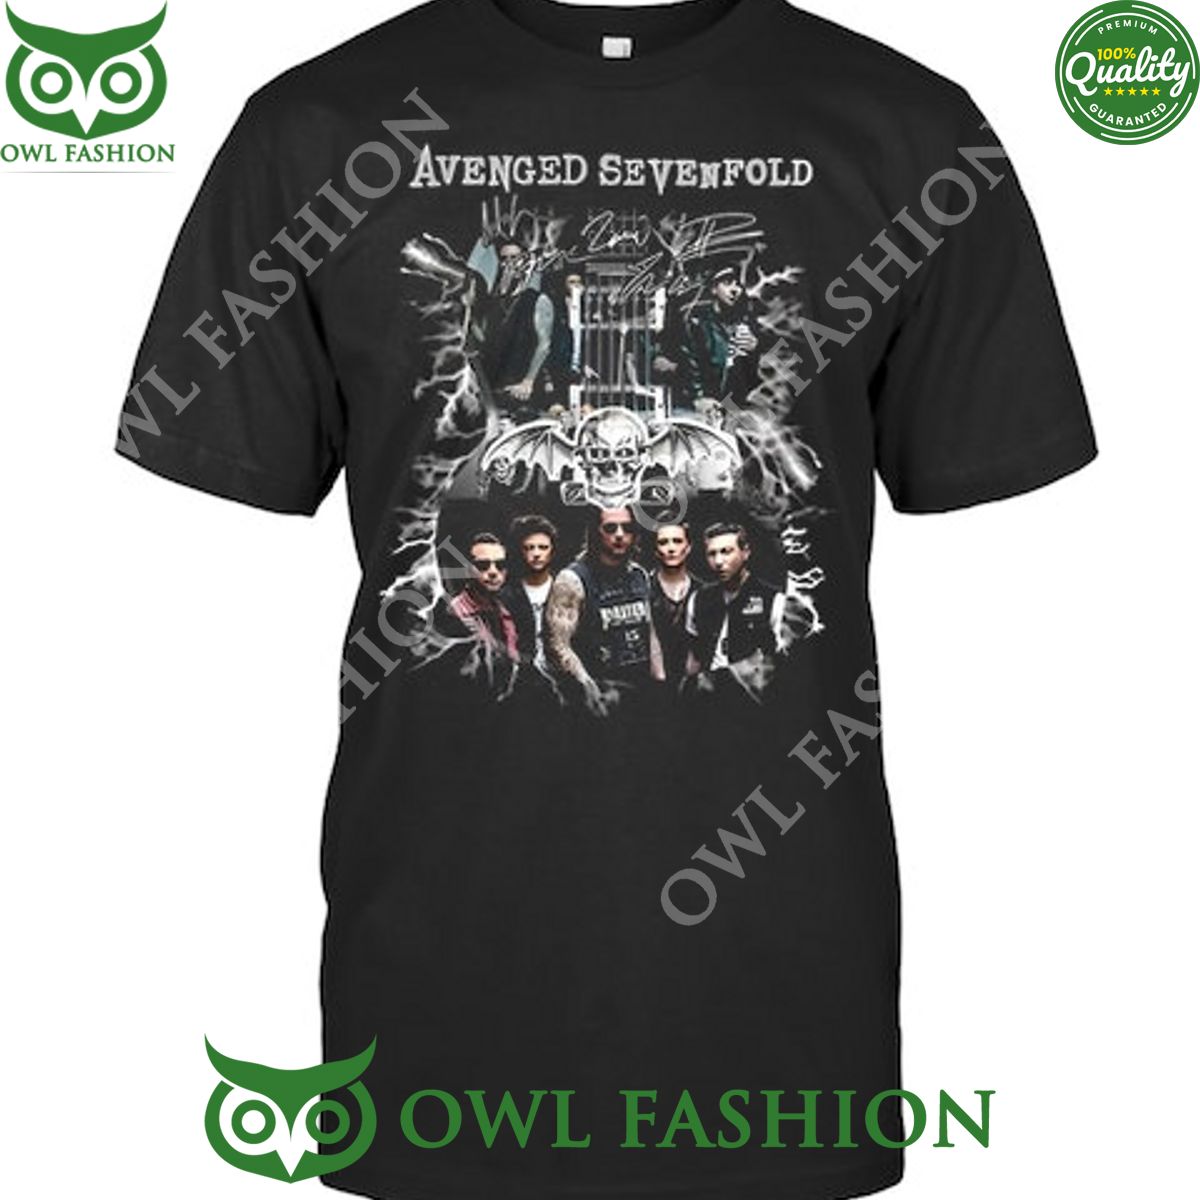 Avenged sevenfold metal band Hail to the King 2D t shirt Stand easy bro